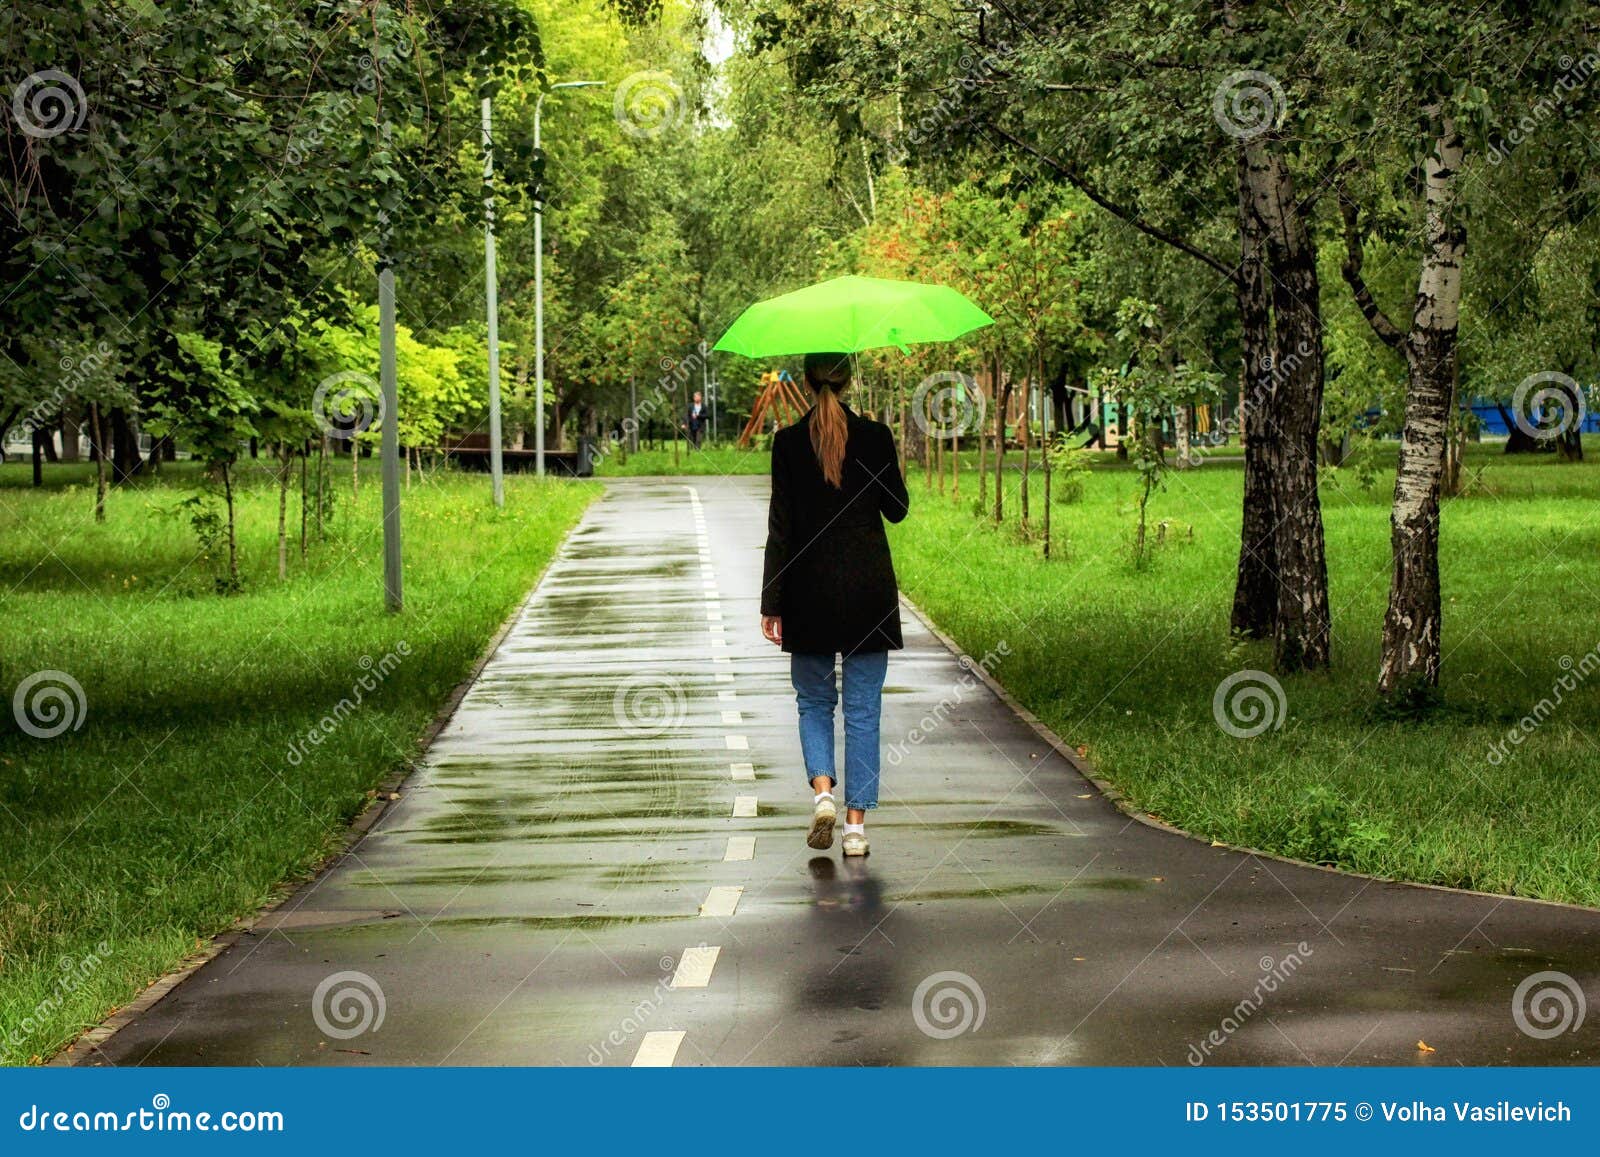 Young Beautiful Girl Walking Alone Under Green Umbrella In The City Park In Summertime Stock